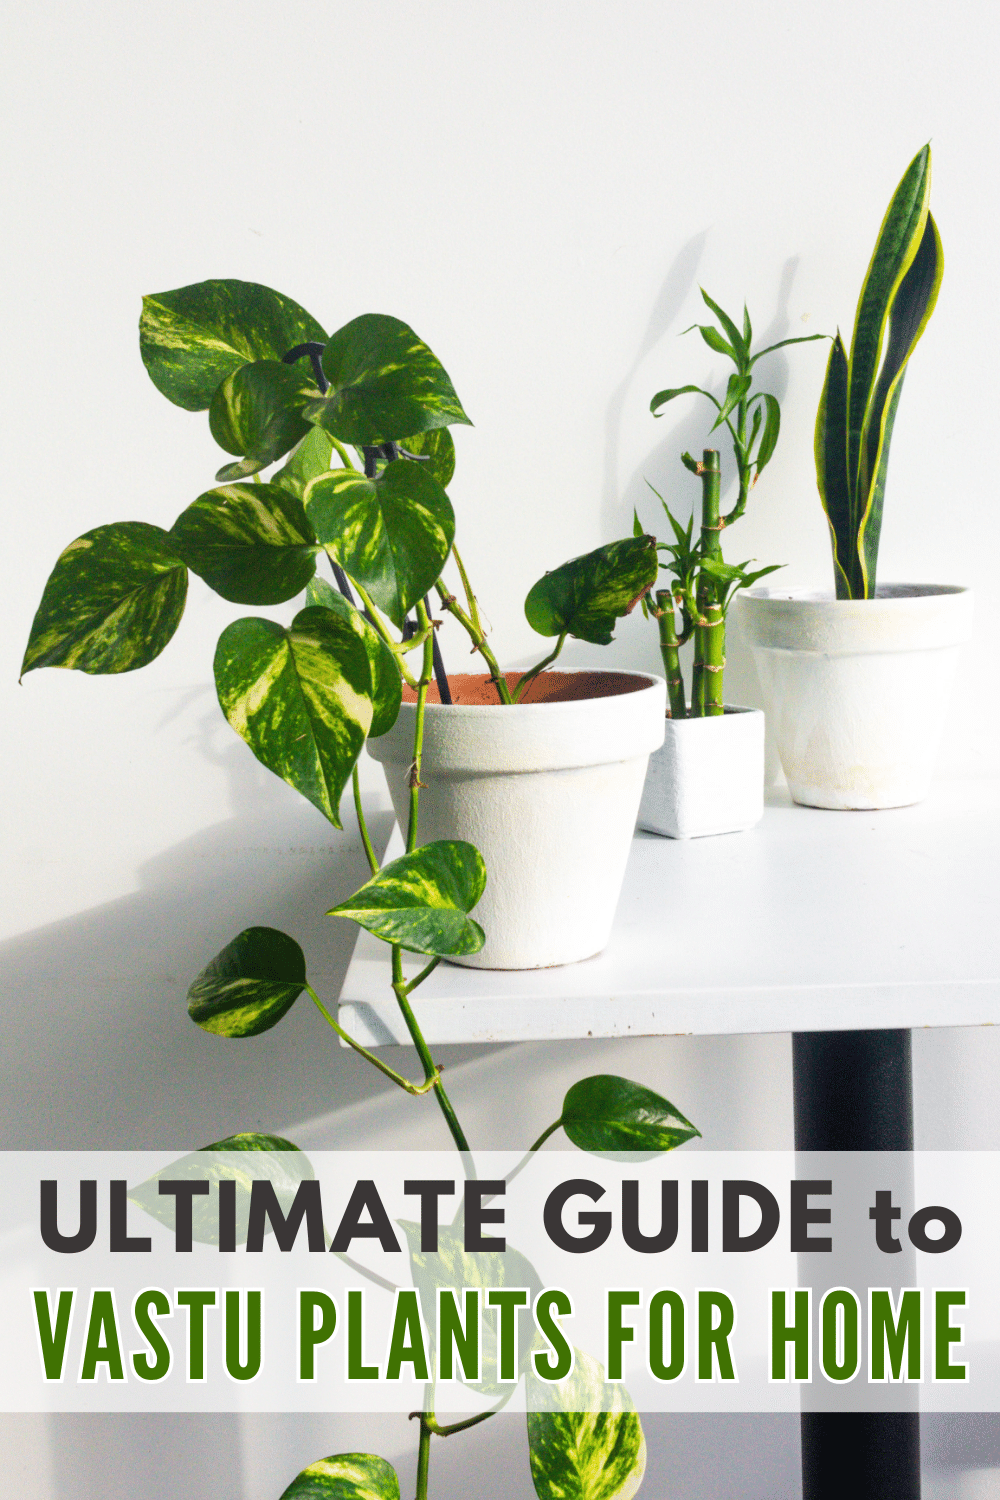 The ultimate guide to Vastu Plants for Home.